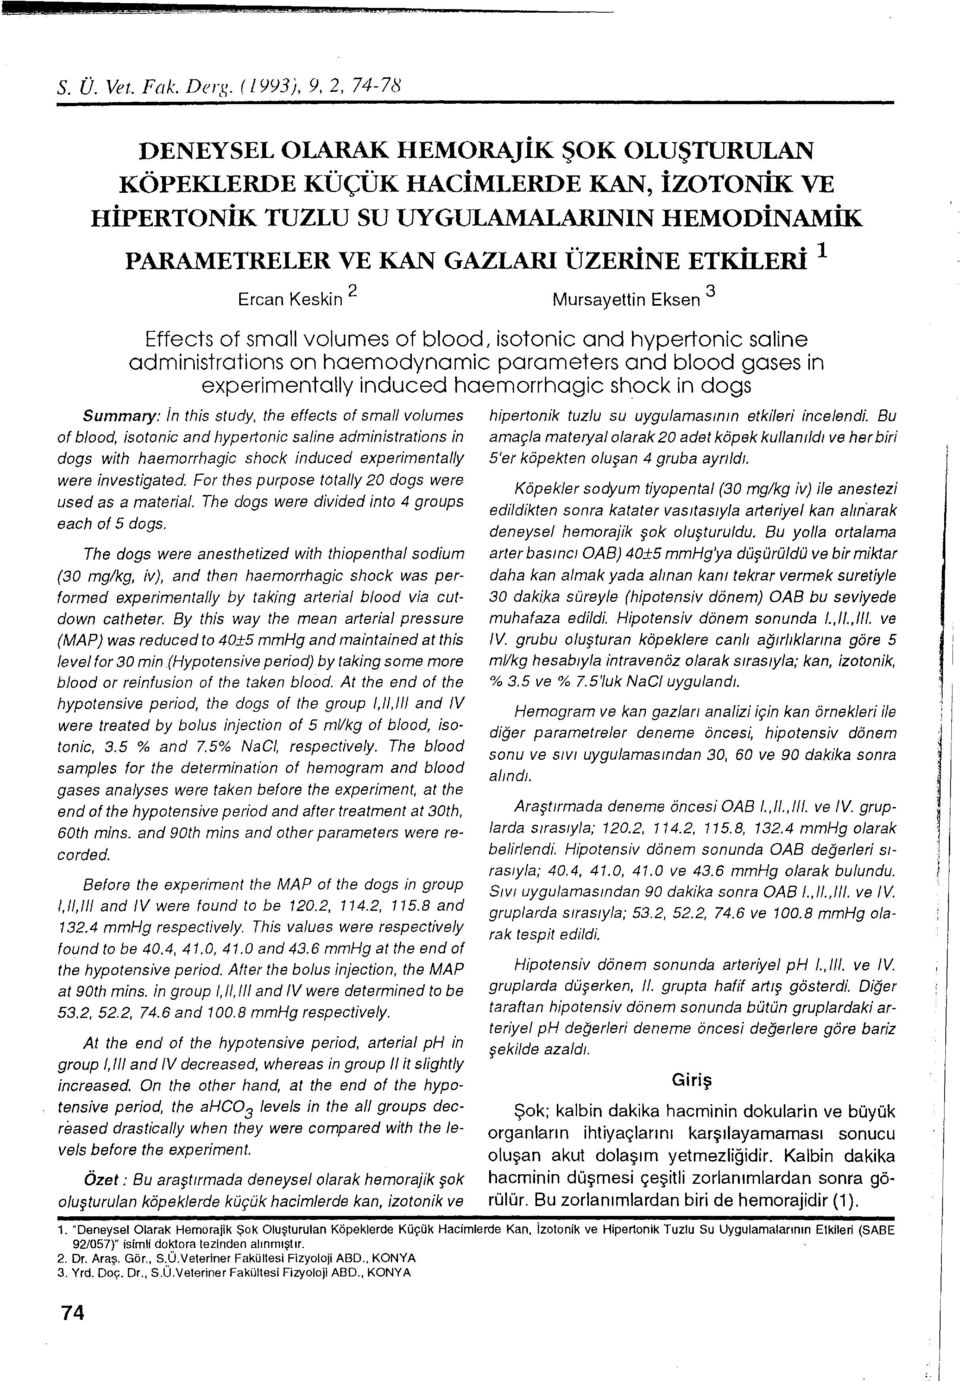 ETKİLERİ 1 Ercan Keskin 2 Mursayettin Eksen 3 Effects of smail volum es of blood, isotonic and hypertonic soline administrotions on hoemodynomic porometers and blood goses in experimentolly induced